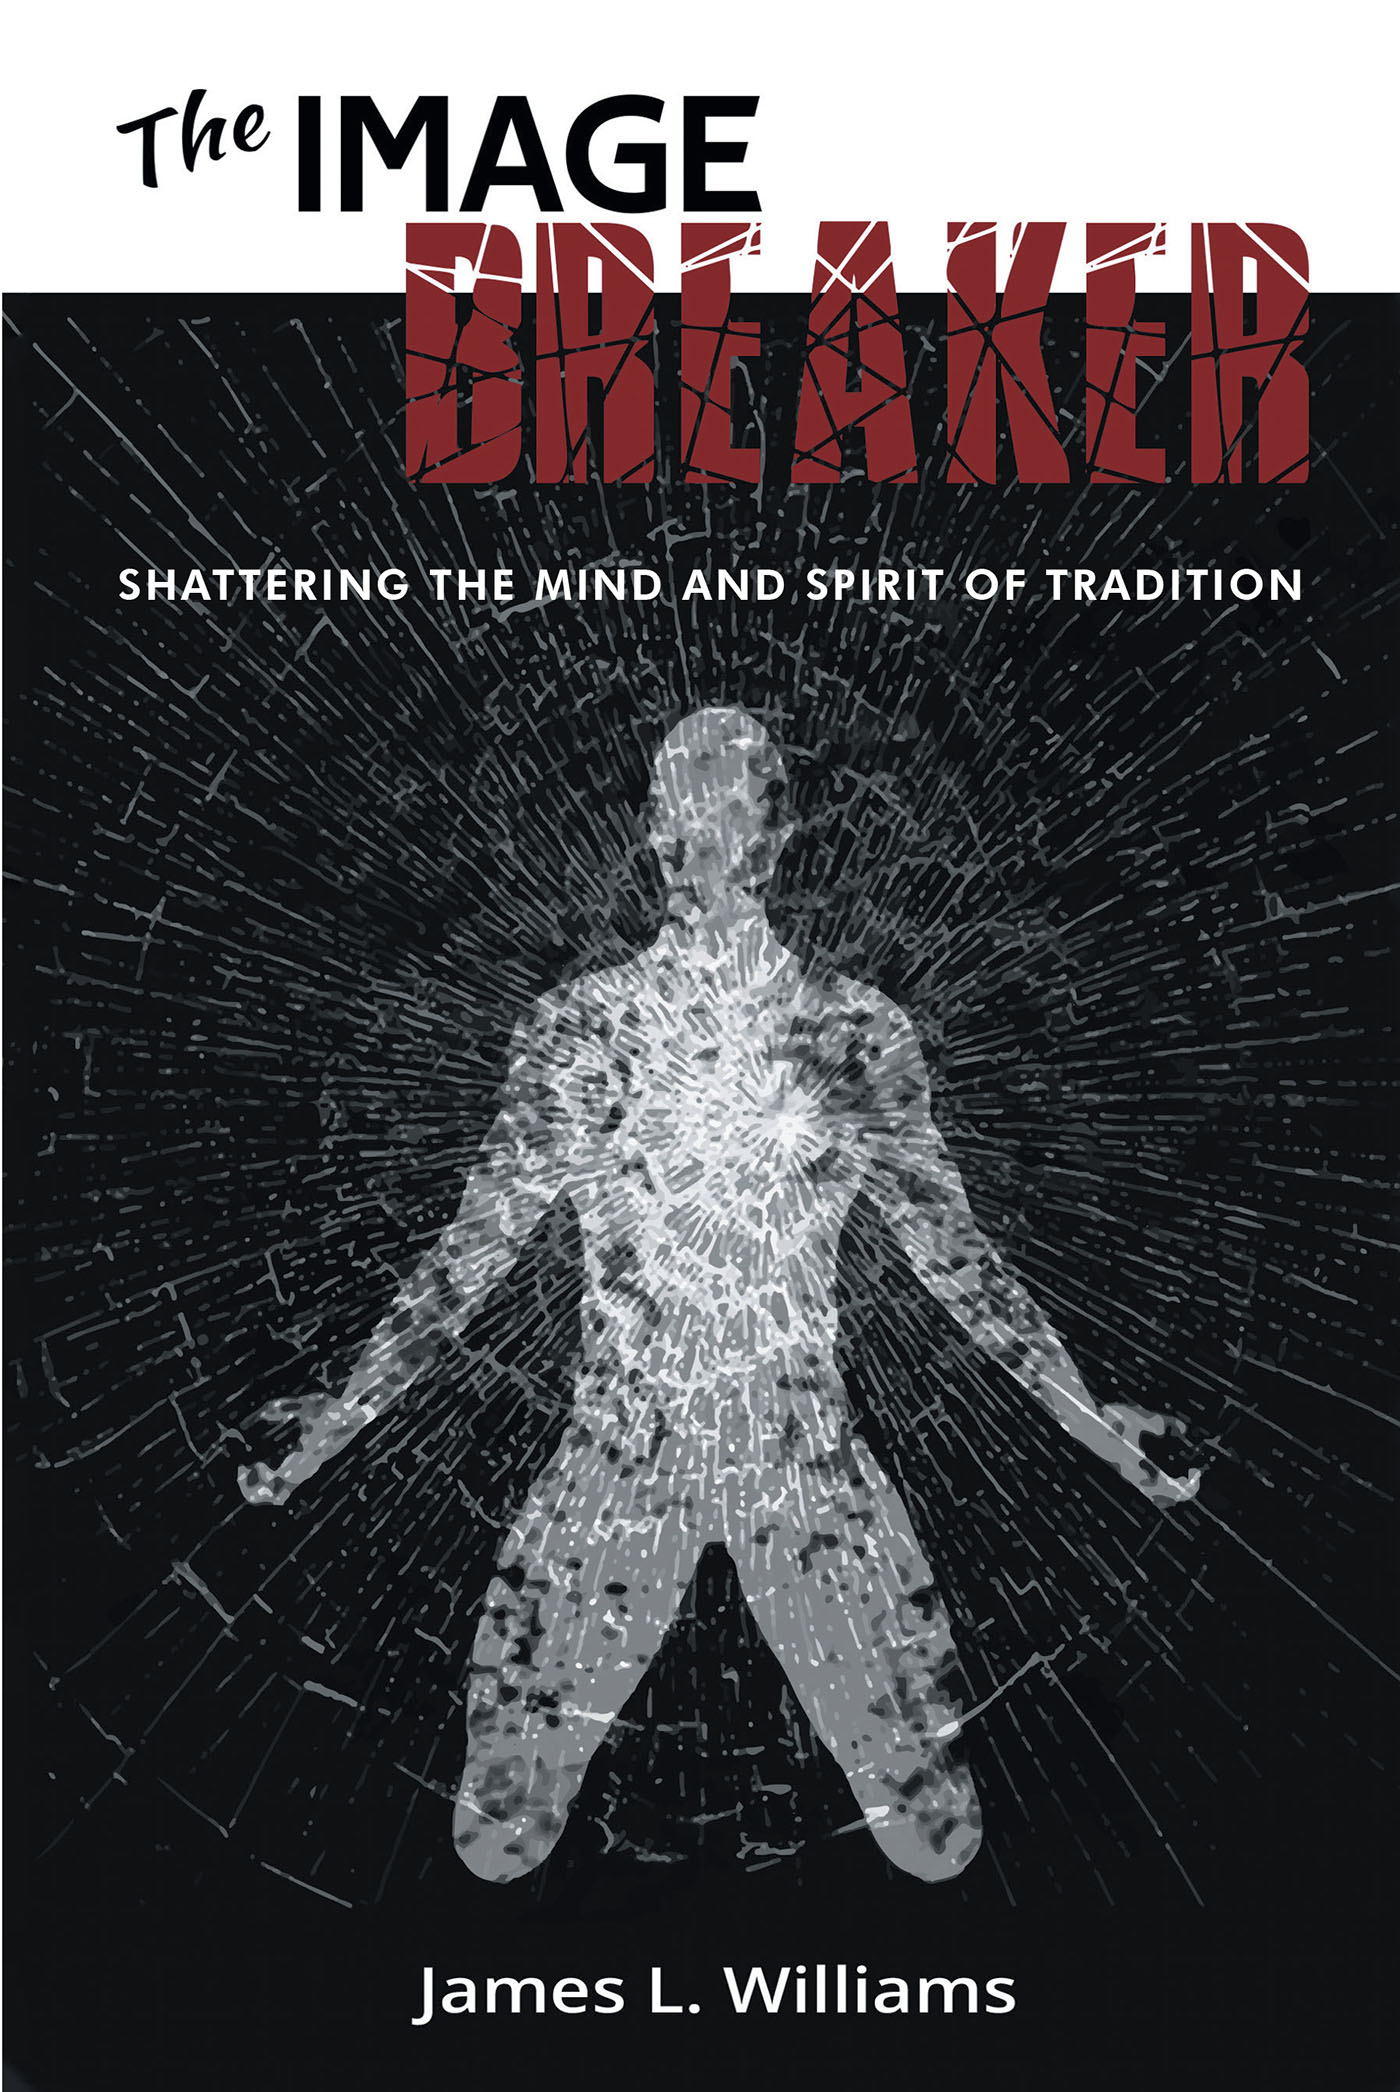 James L. Williams’s Newly Released "The Image Breaker: Shattering the Mind and Spirit of Tradition" is a Perceptive Reflection on Modern Challenges to Biblical Truths